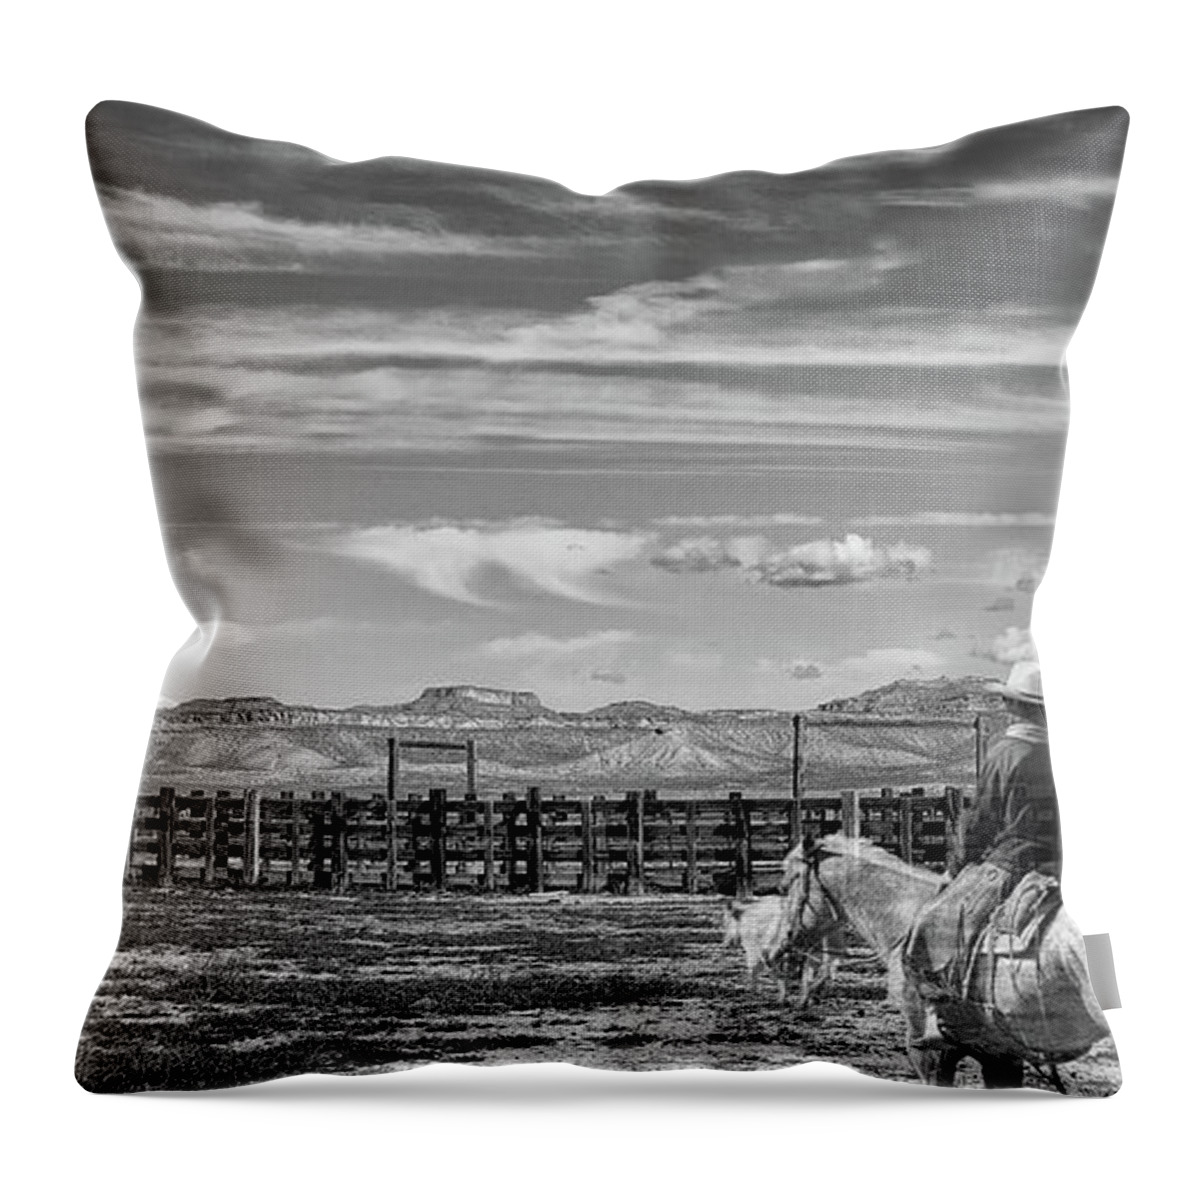 Black And White Landscape Throw Pillow featuring the photograph Ghost Rider by Jim Garrison